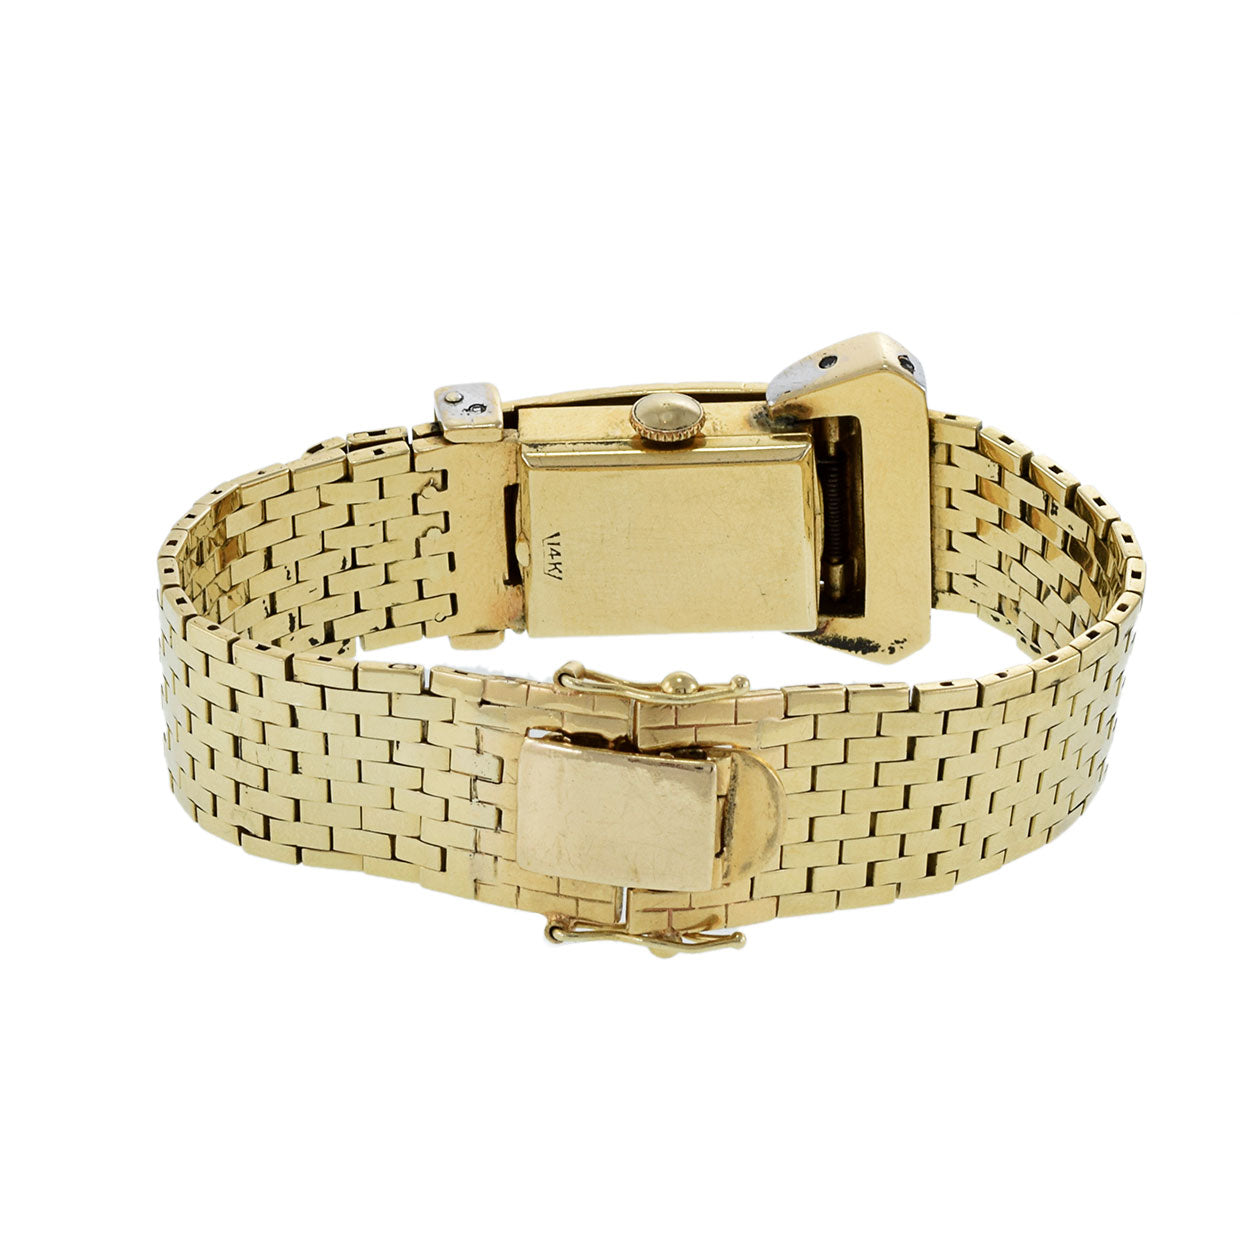 Jerral 14K Yellow Gold and Diamond Cocktail Watch